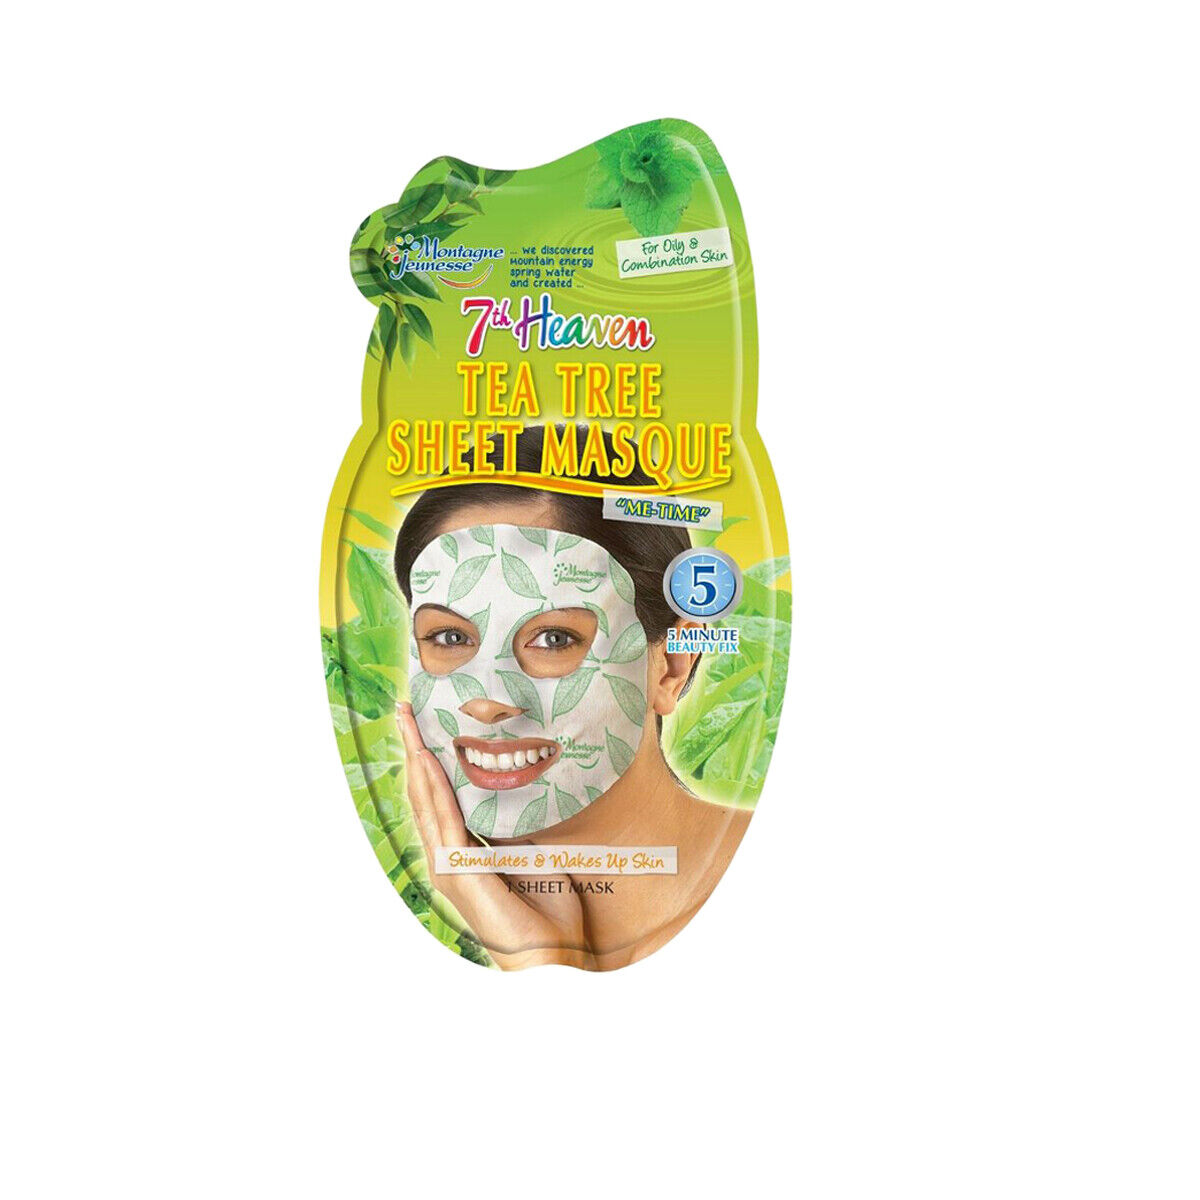 7th Heaven Mud Masks for All Skin Types